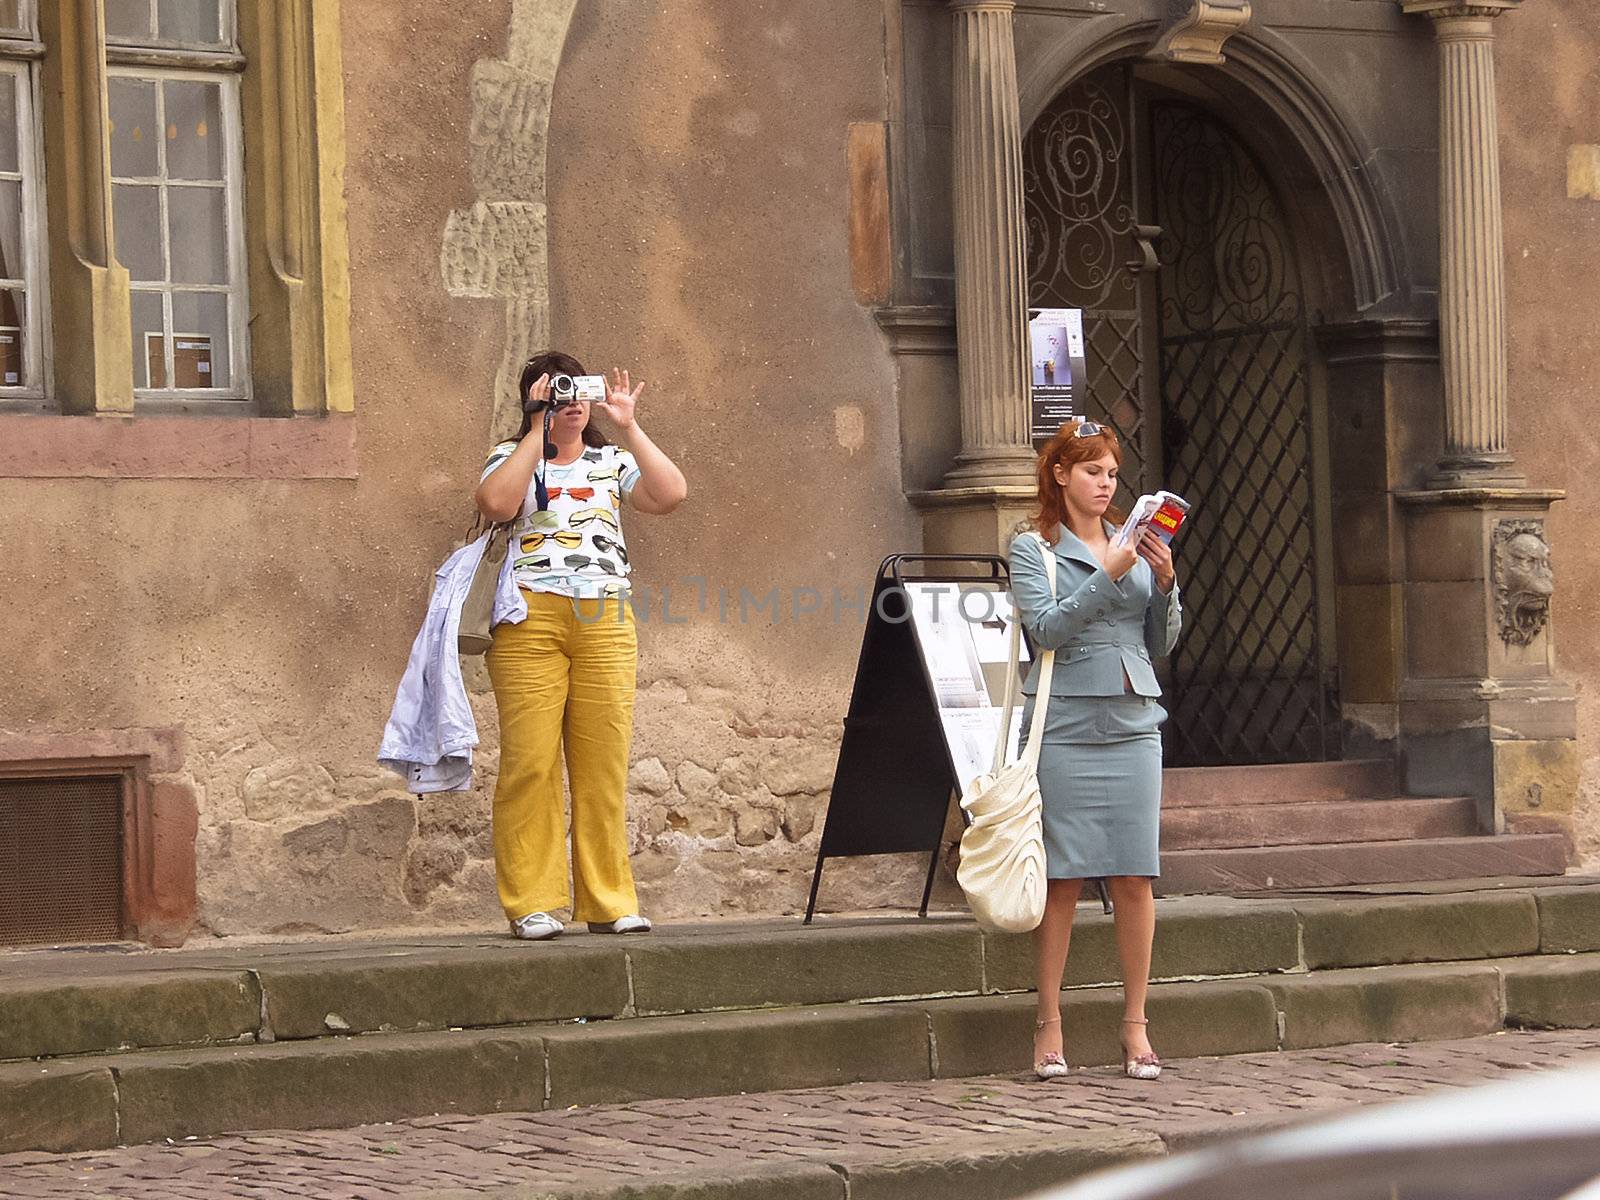 09/14/2007. Colmar. France. Two young women looking at the sights of the city